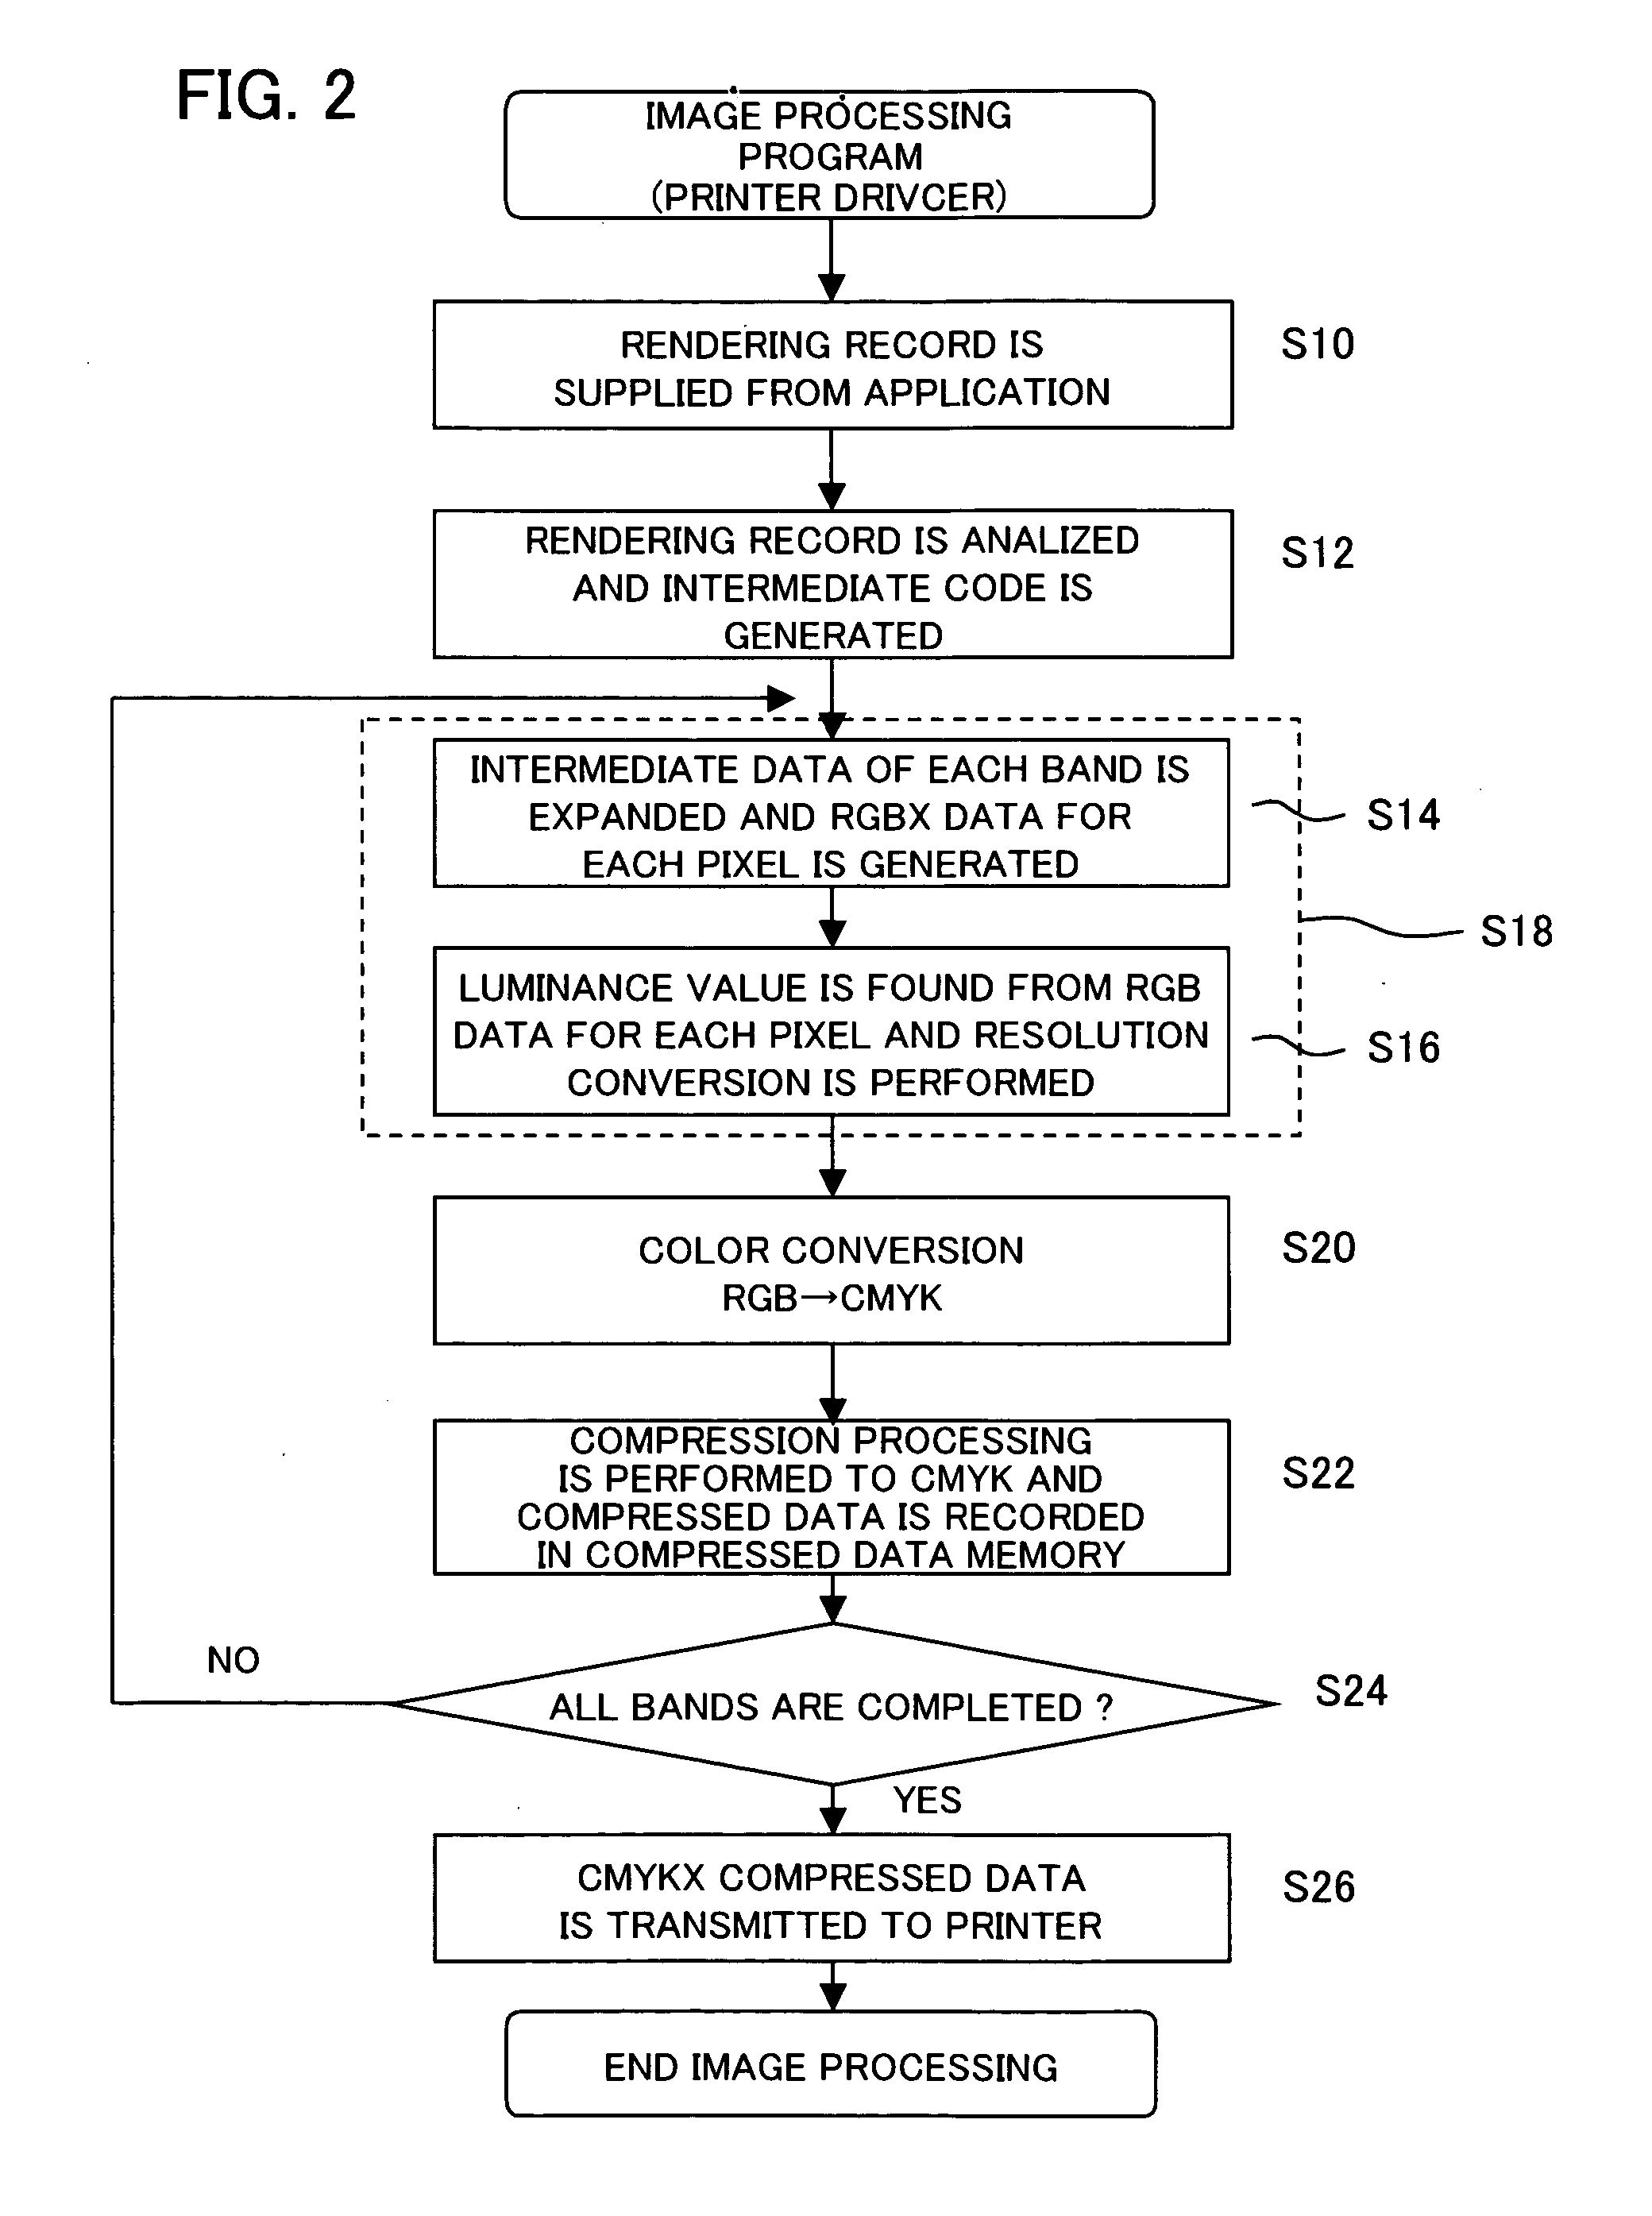 Image processing device and image processing program allowing computer to execute image processing